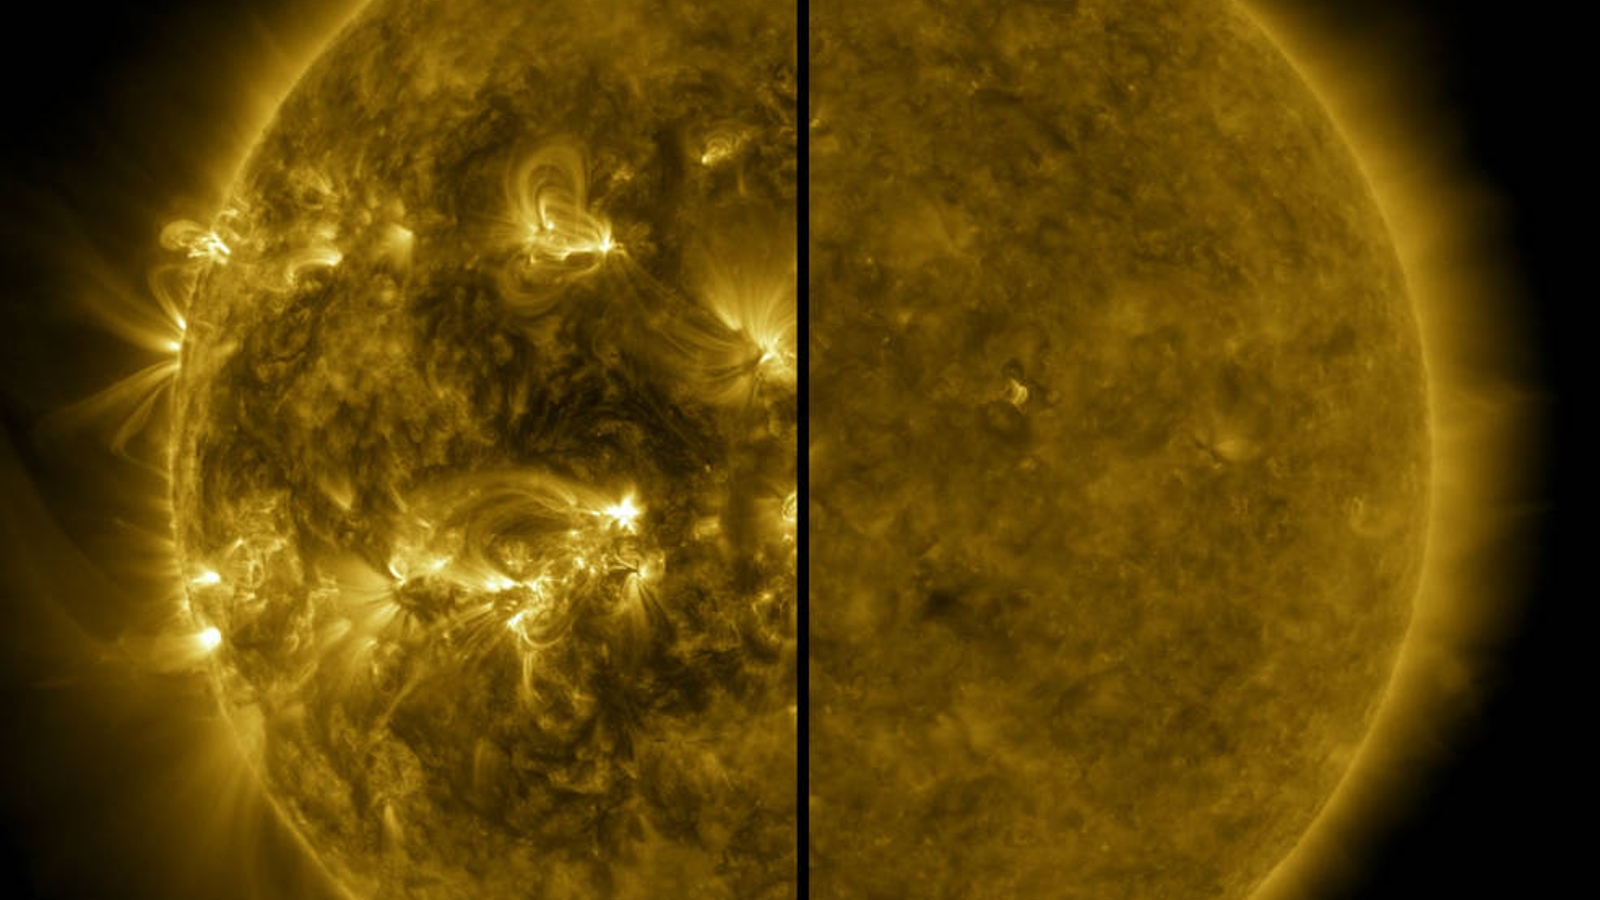 Solar maximum could hit us harder and sooner than we thought. How dangerous will the sun's chaotic peak be?